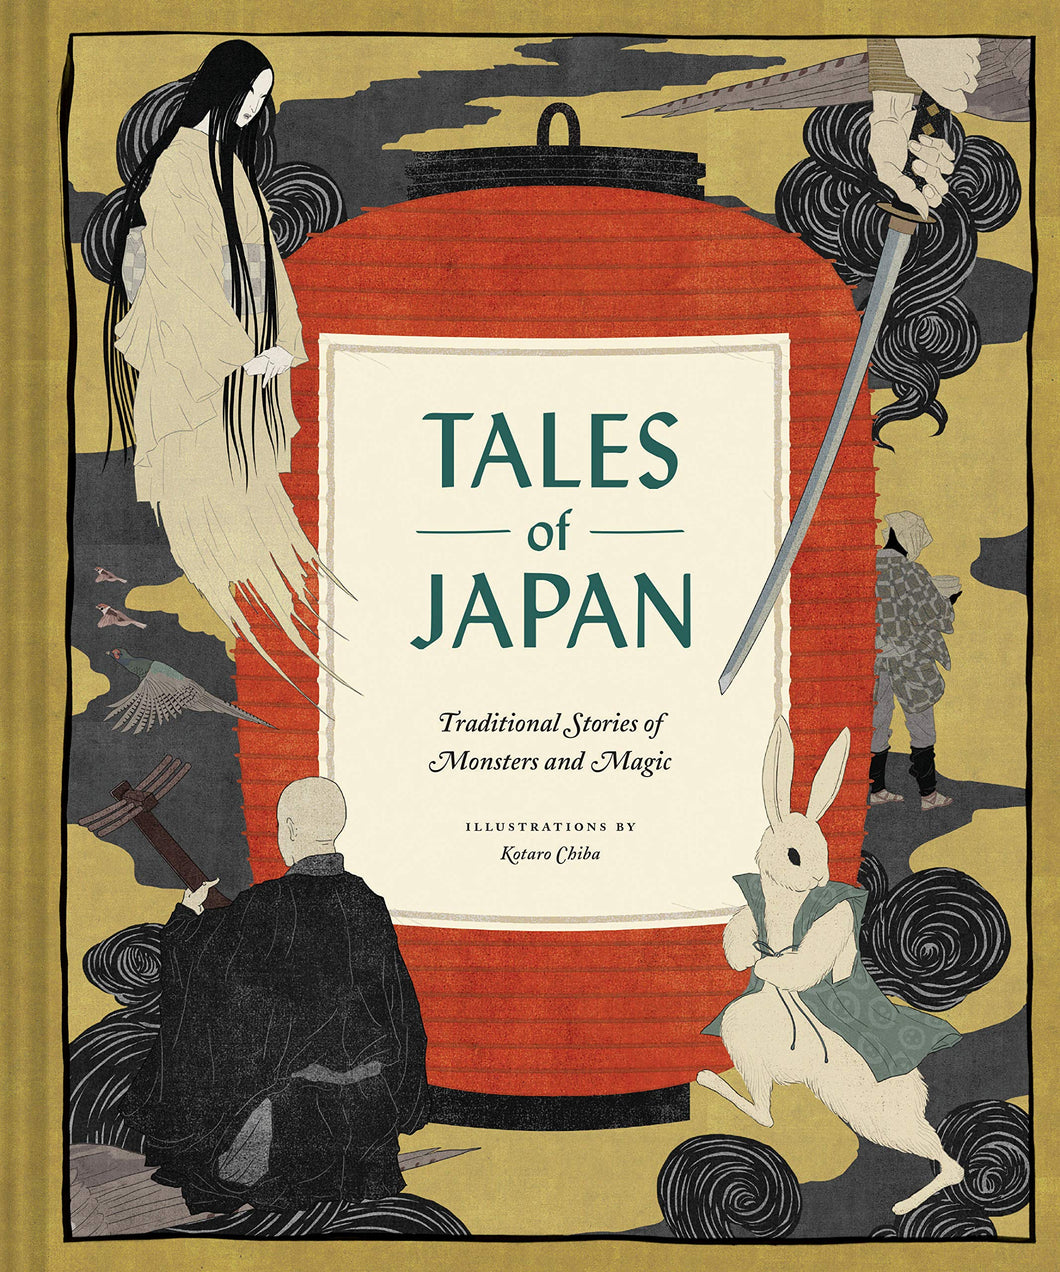 Tales of Japan: Traditional Stories of Monsters and Magic [Kotaro Chiba (Illustrator)]